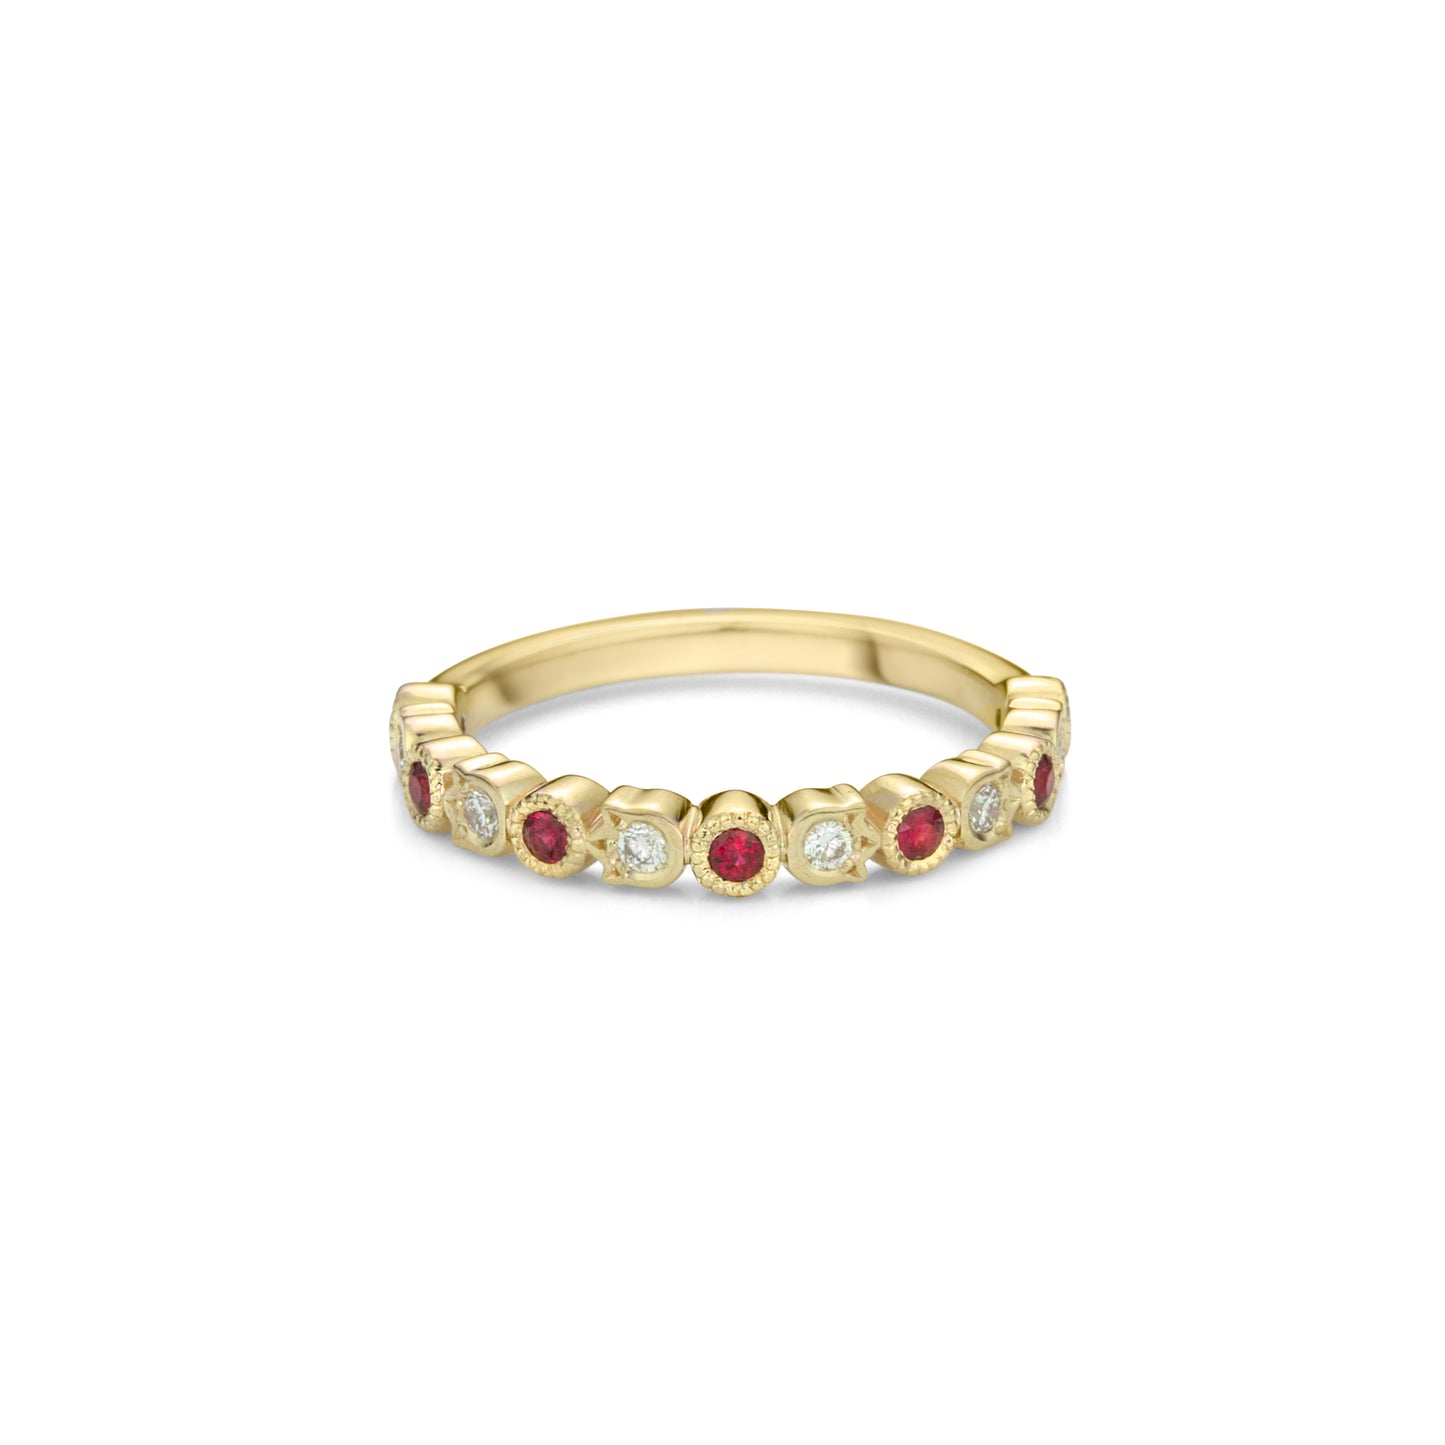 A yellow gold band style ring set half way with alternating fine rubies in round bezels with millegrain and diamonds in flower shaped bezels.